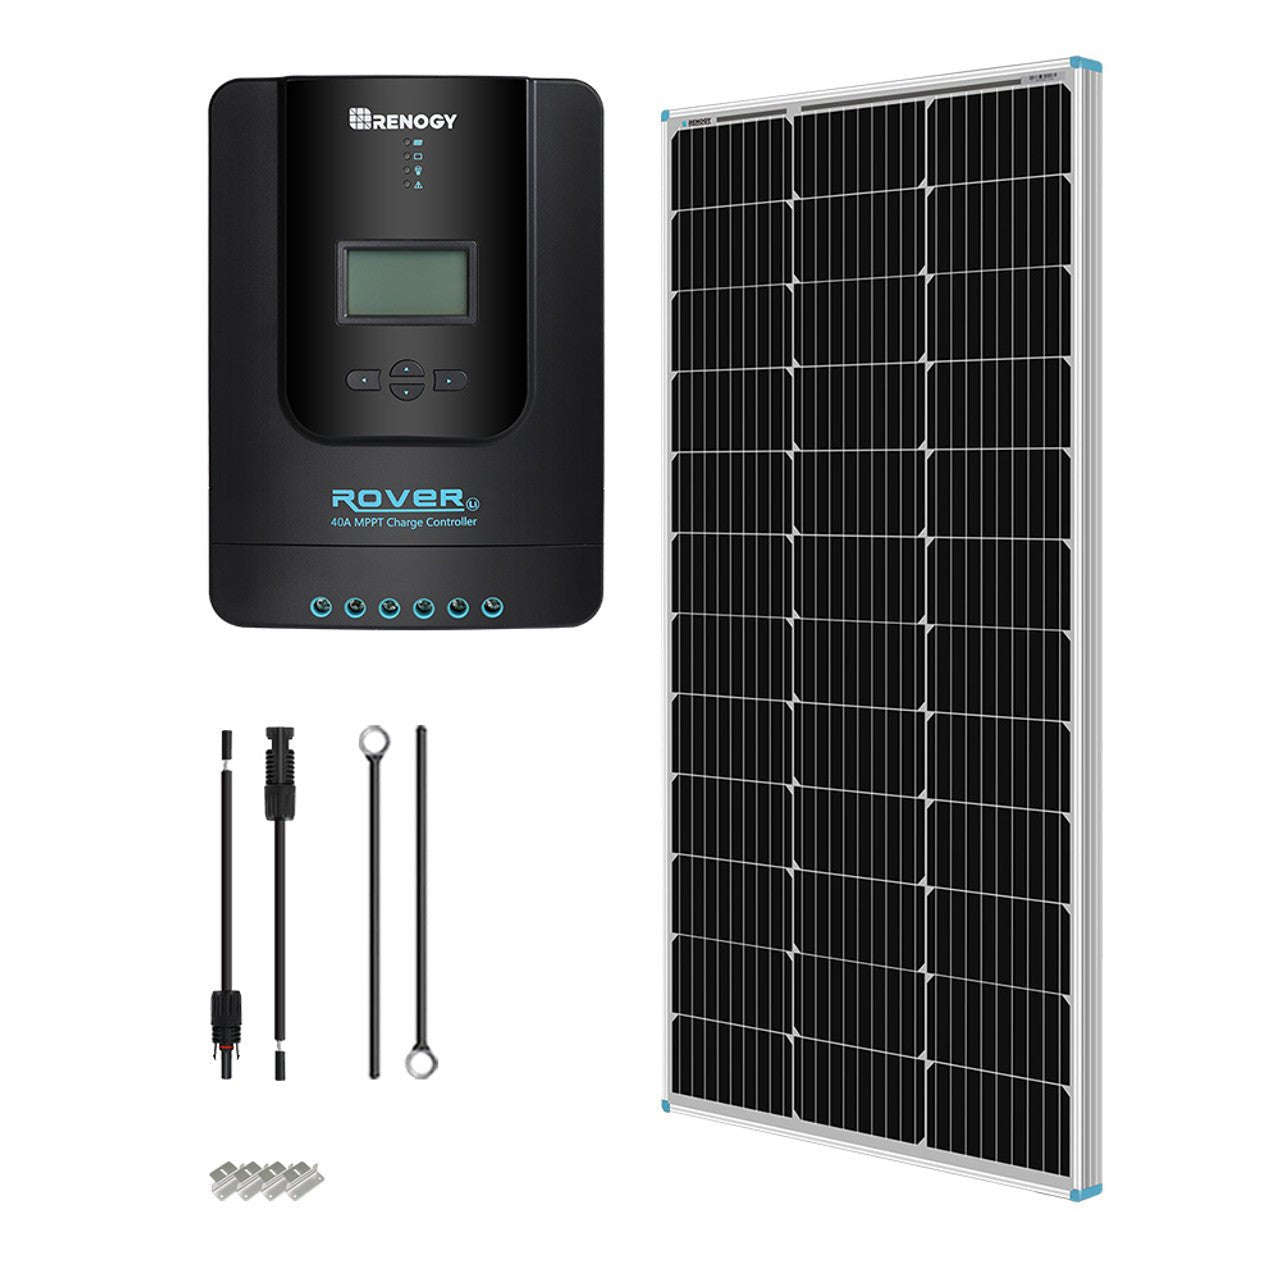 Renogy 100 Watt 12 Volt Solar Starter Kit with 40A MPPT Charge Controller - Solar Generators and Power Stations Plus